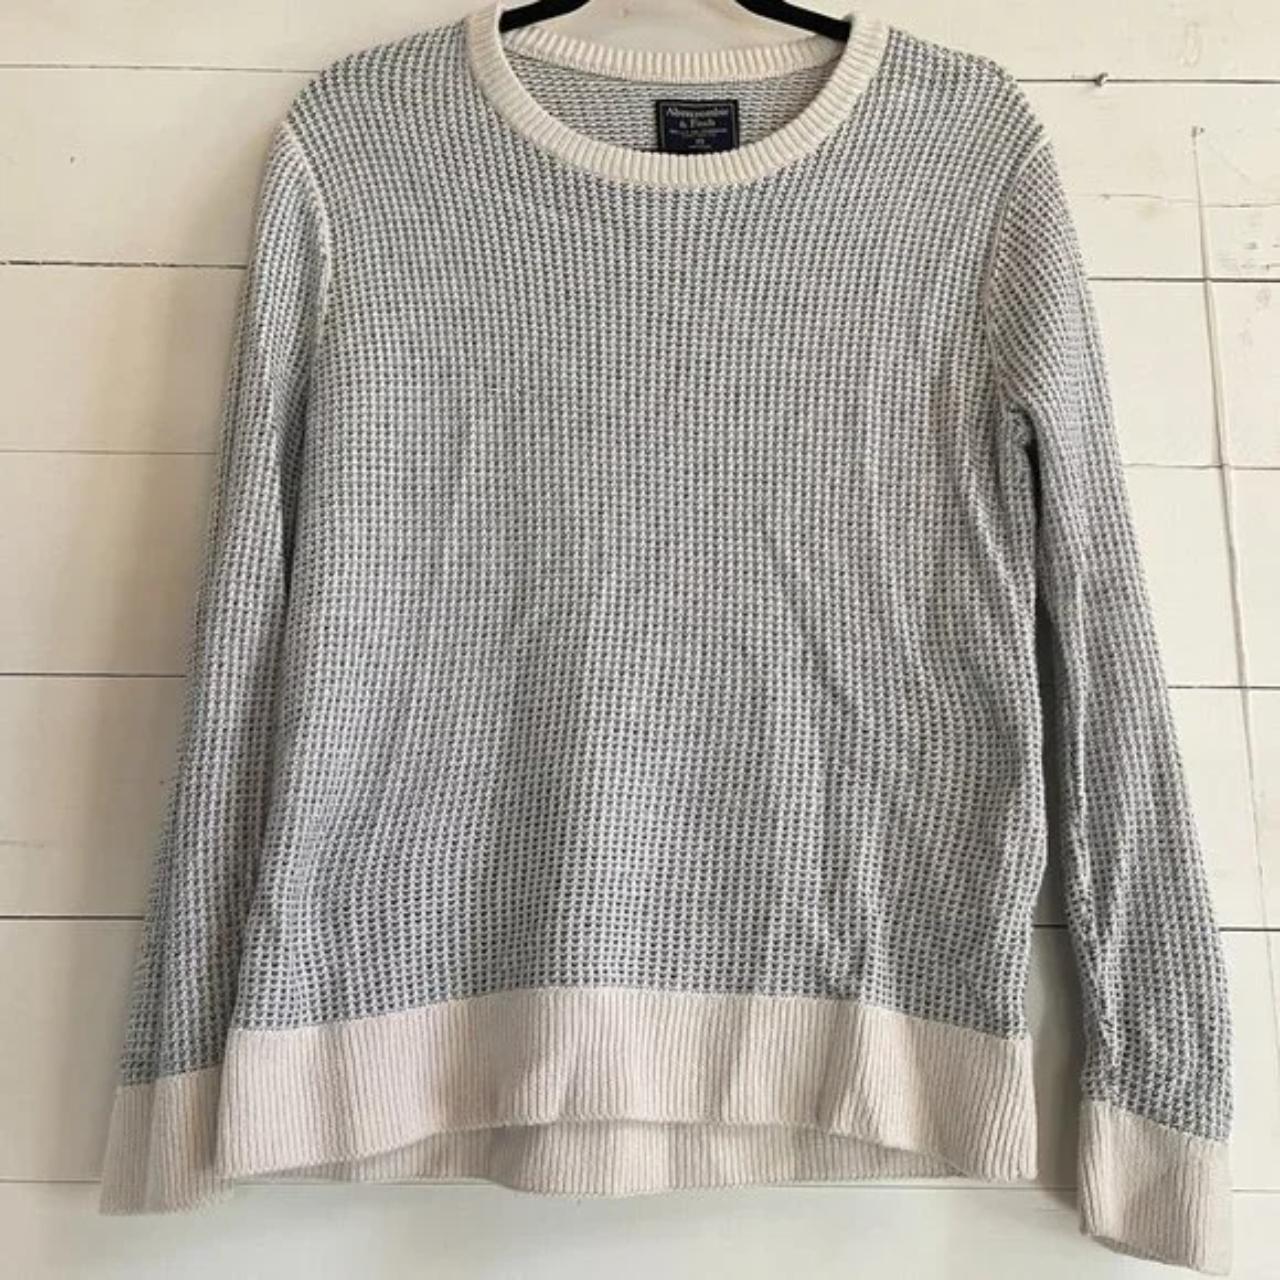 Abercrombie & Fitch Blue/white Knit Sweater Great... - Depop